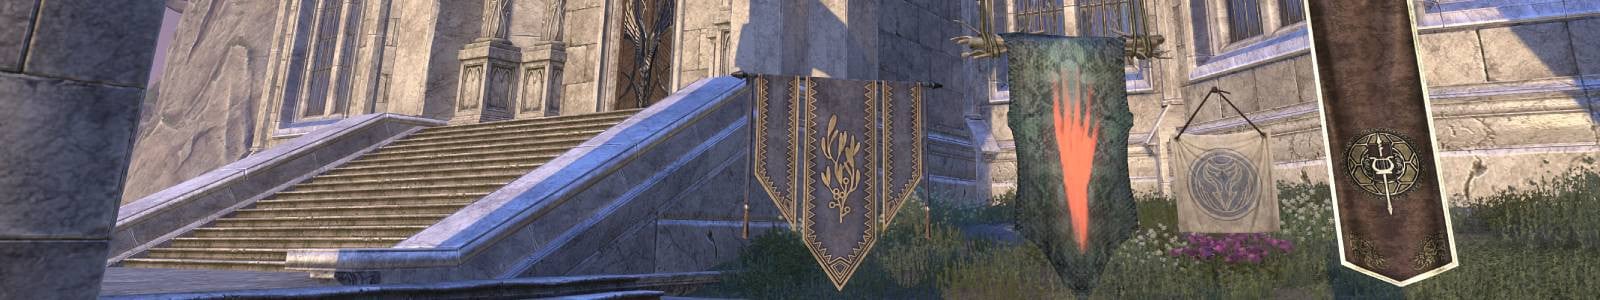 Stablemaster's Sign, Large - ESO header